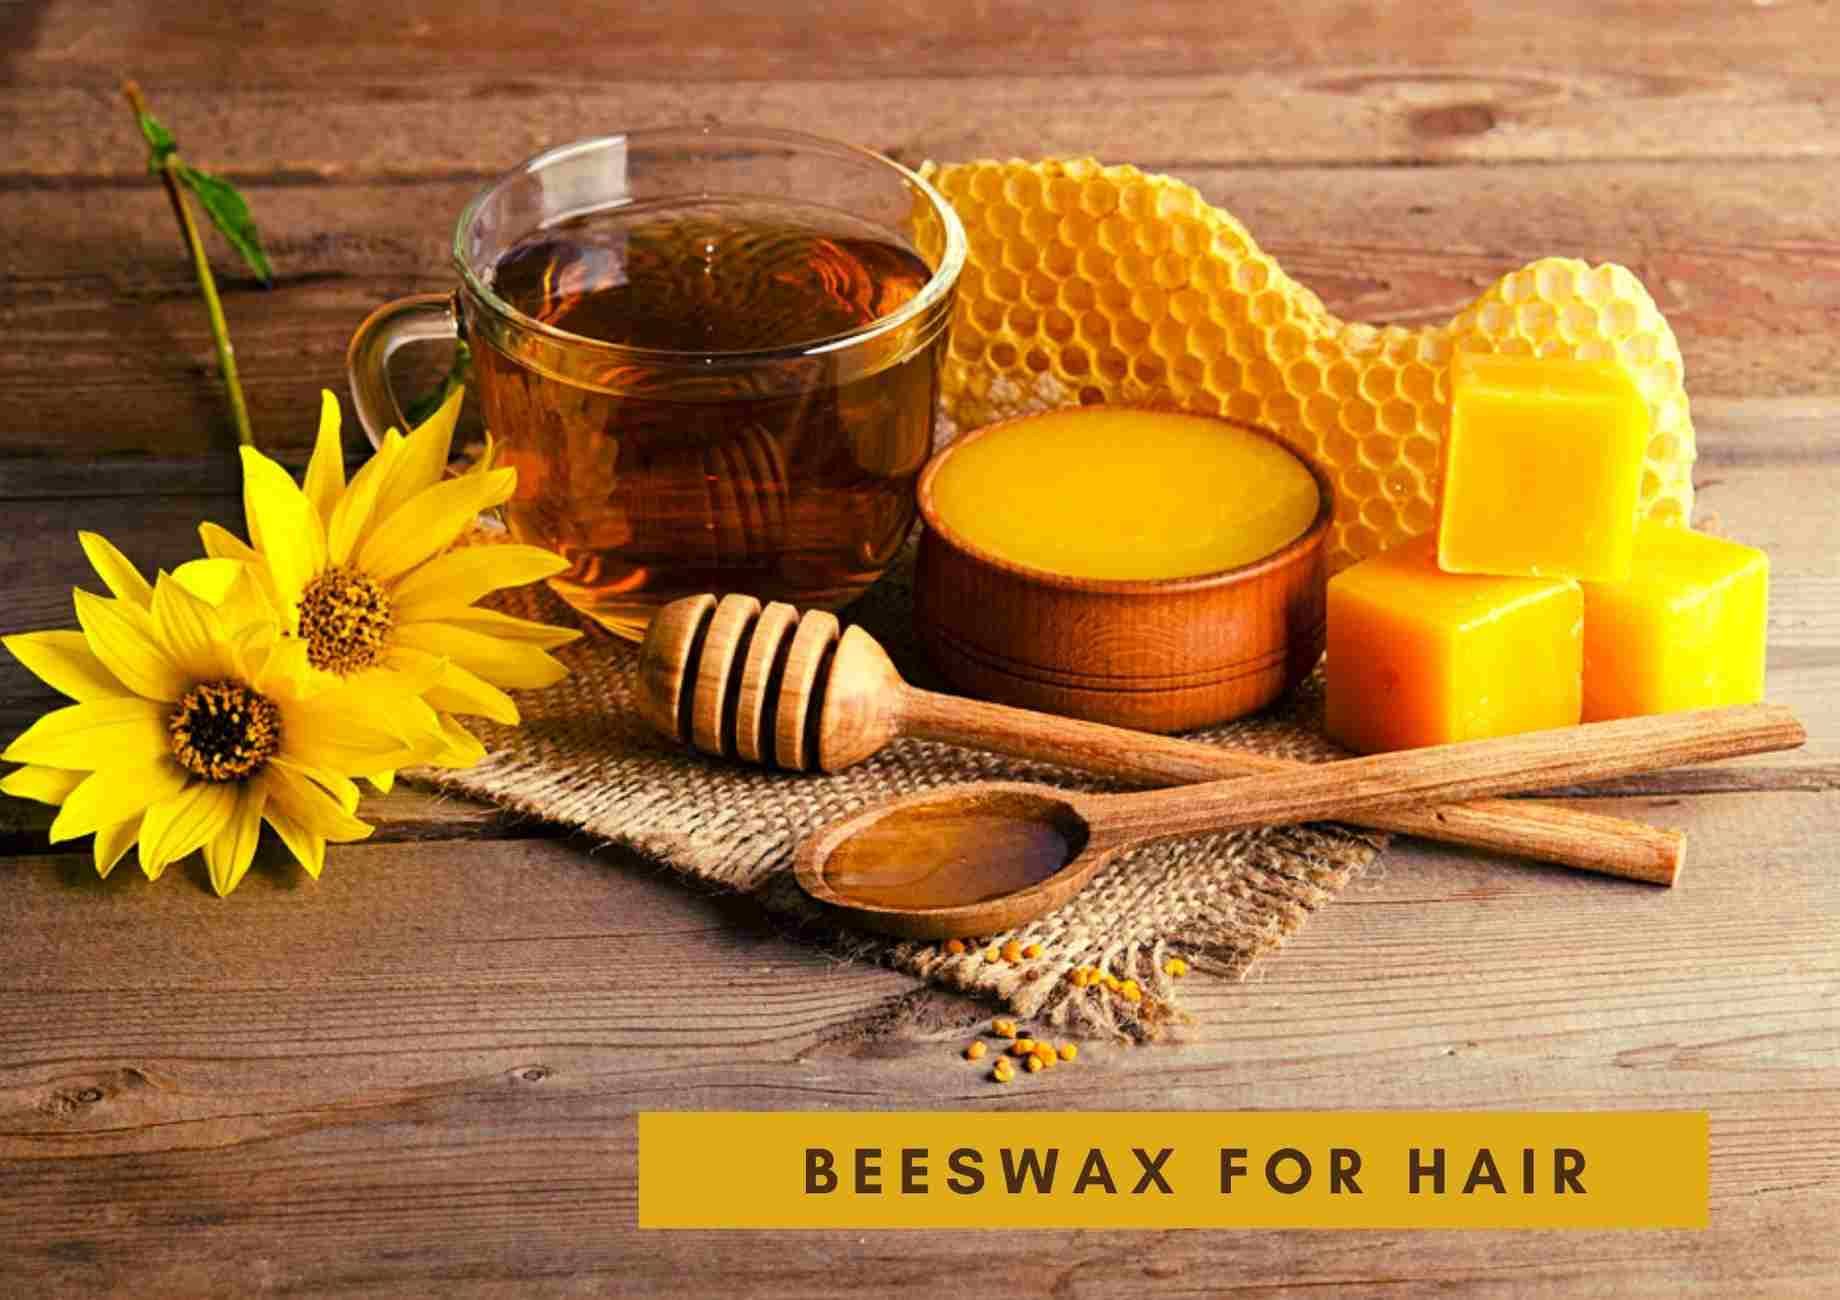 5 Top Beeswax Benefits For Hair 2021 | How To Use On Natural Hair, DIY And Best Products